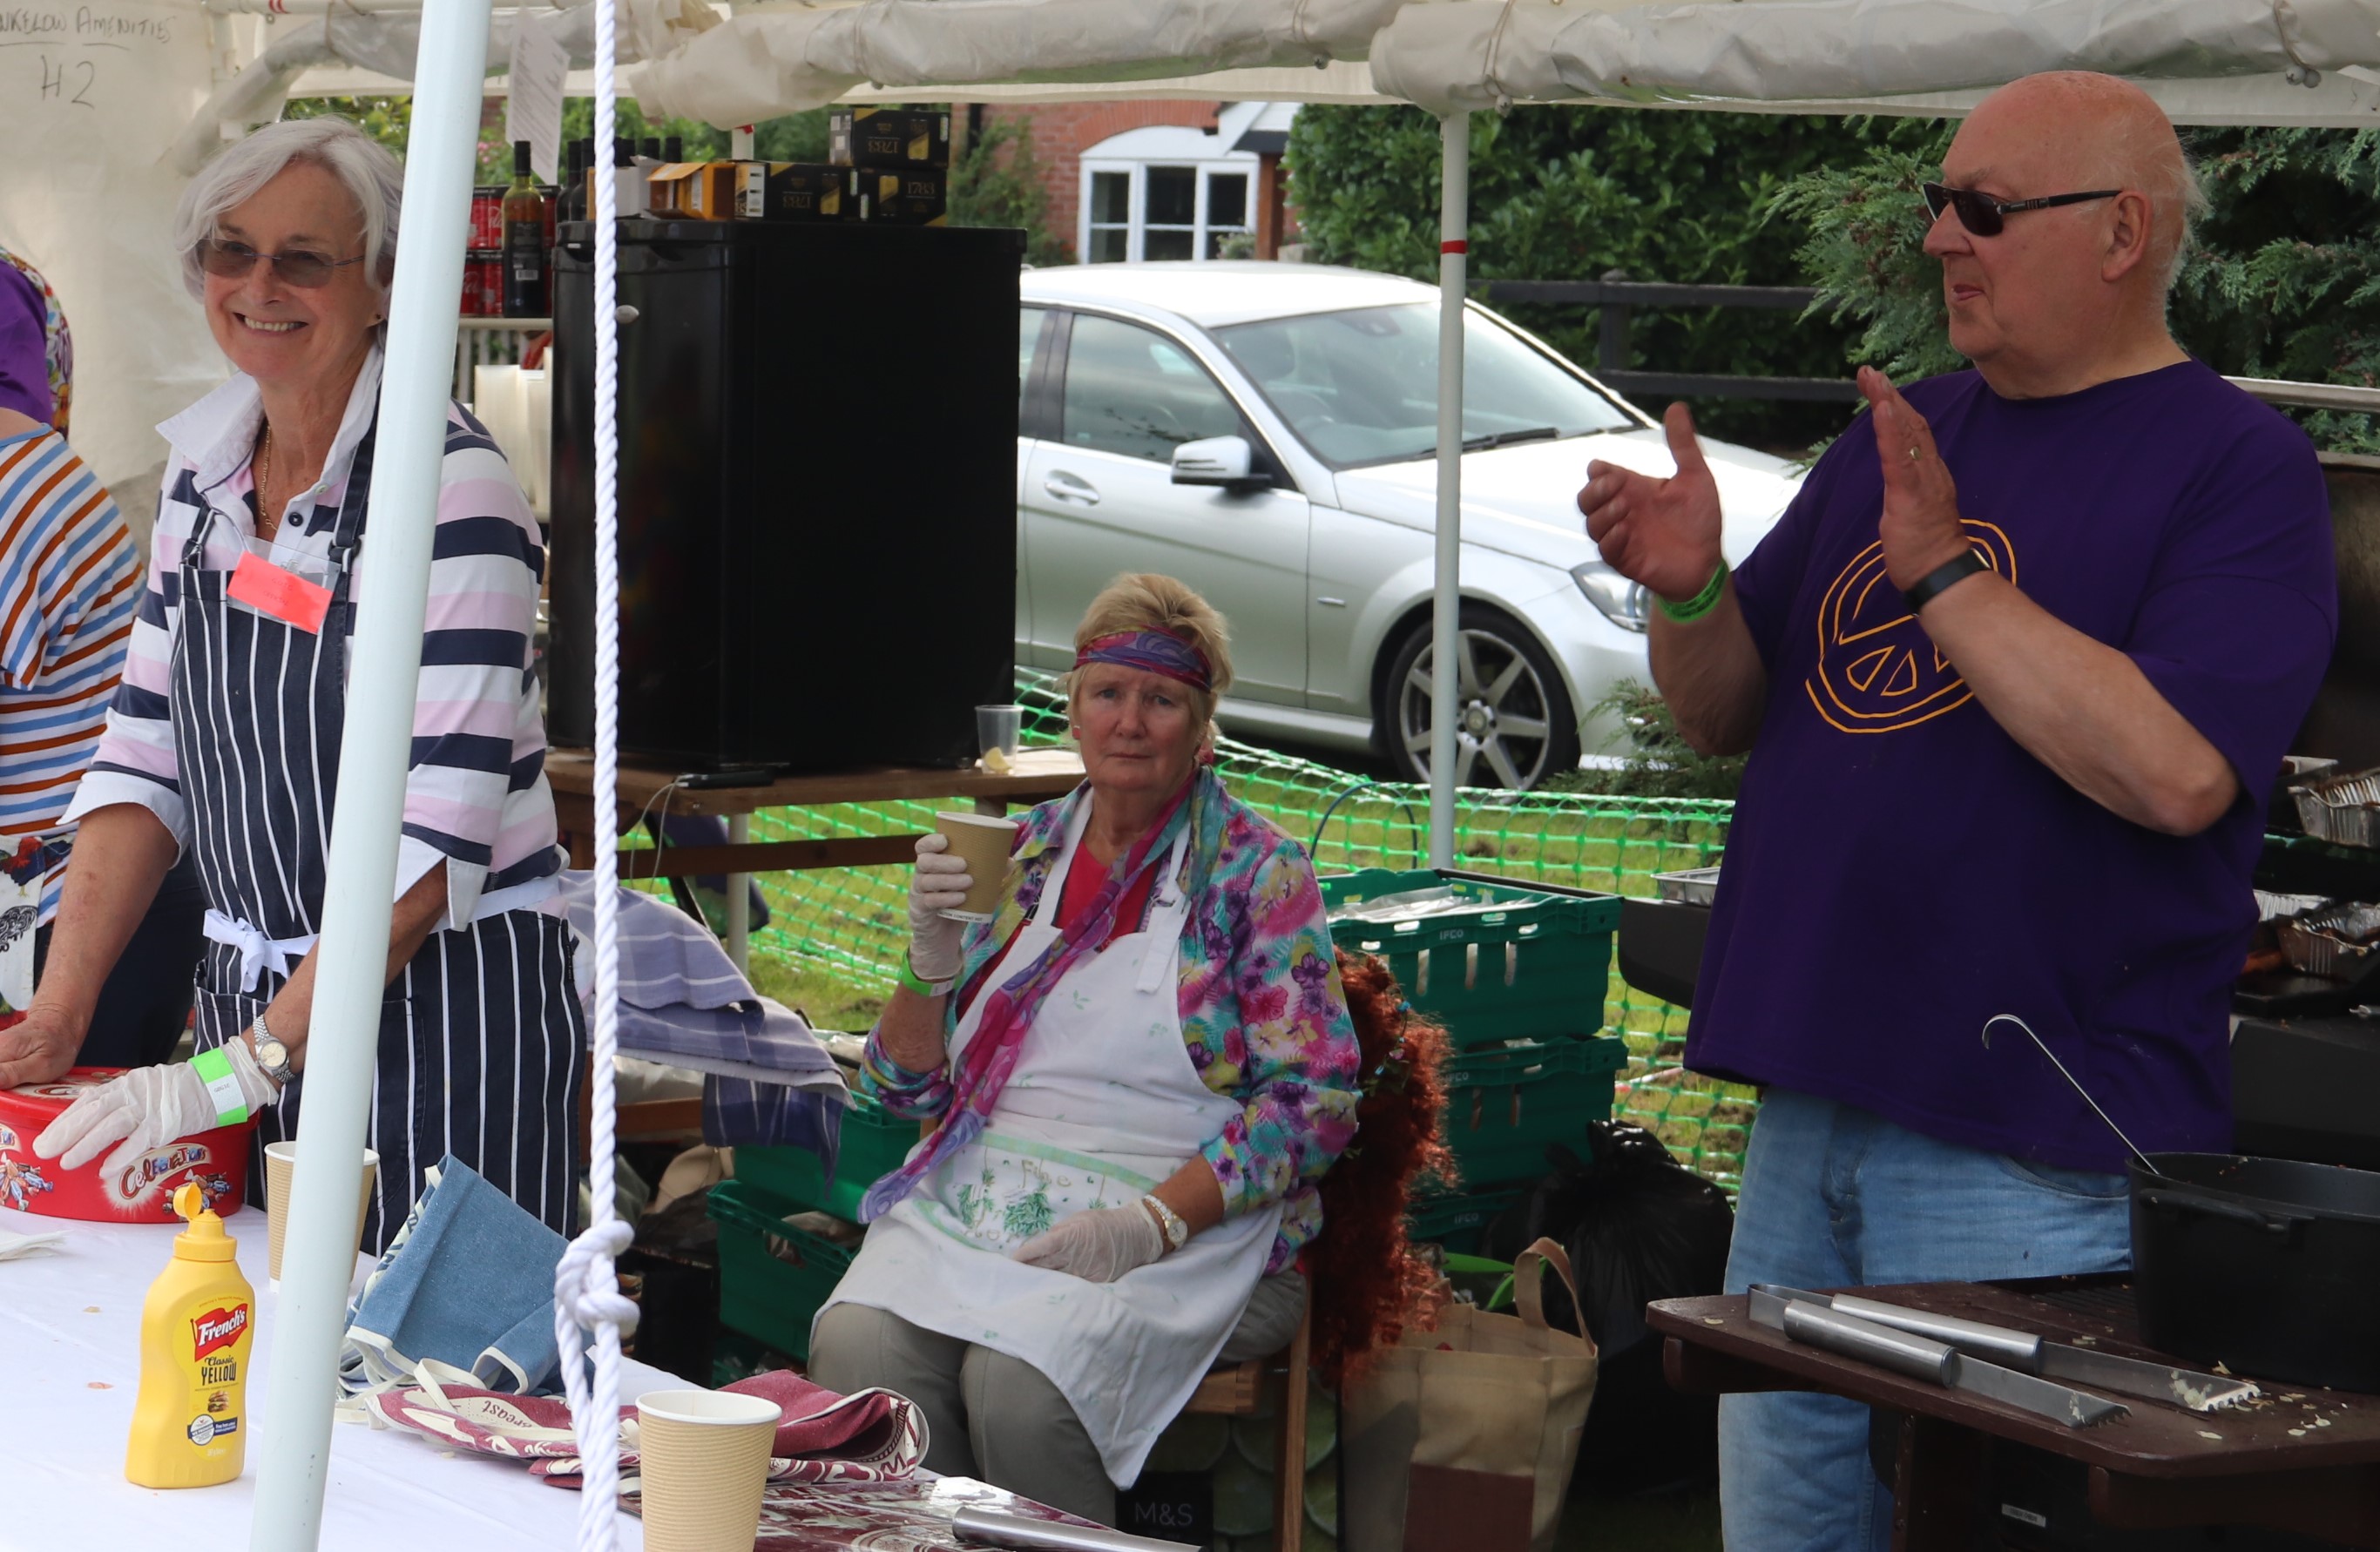 Photographs taken at the Groovin' on the Green event, September 2019